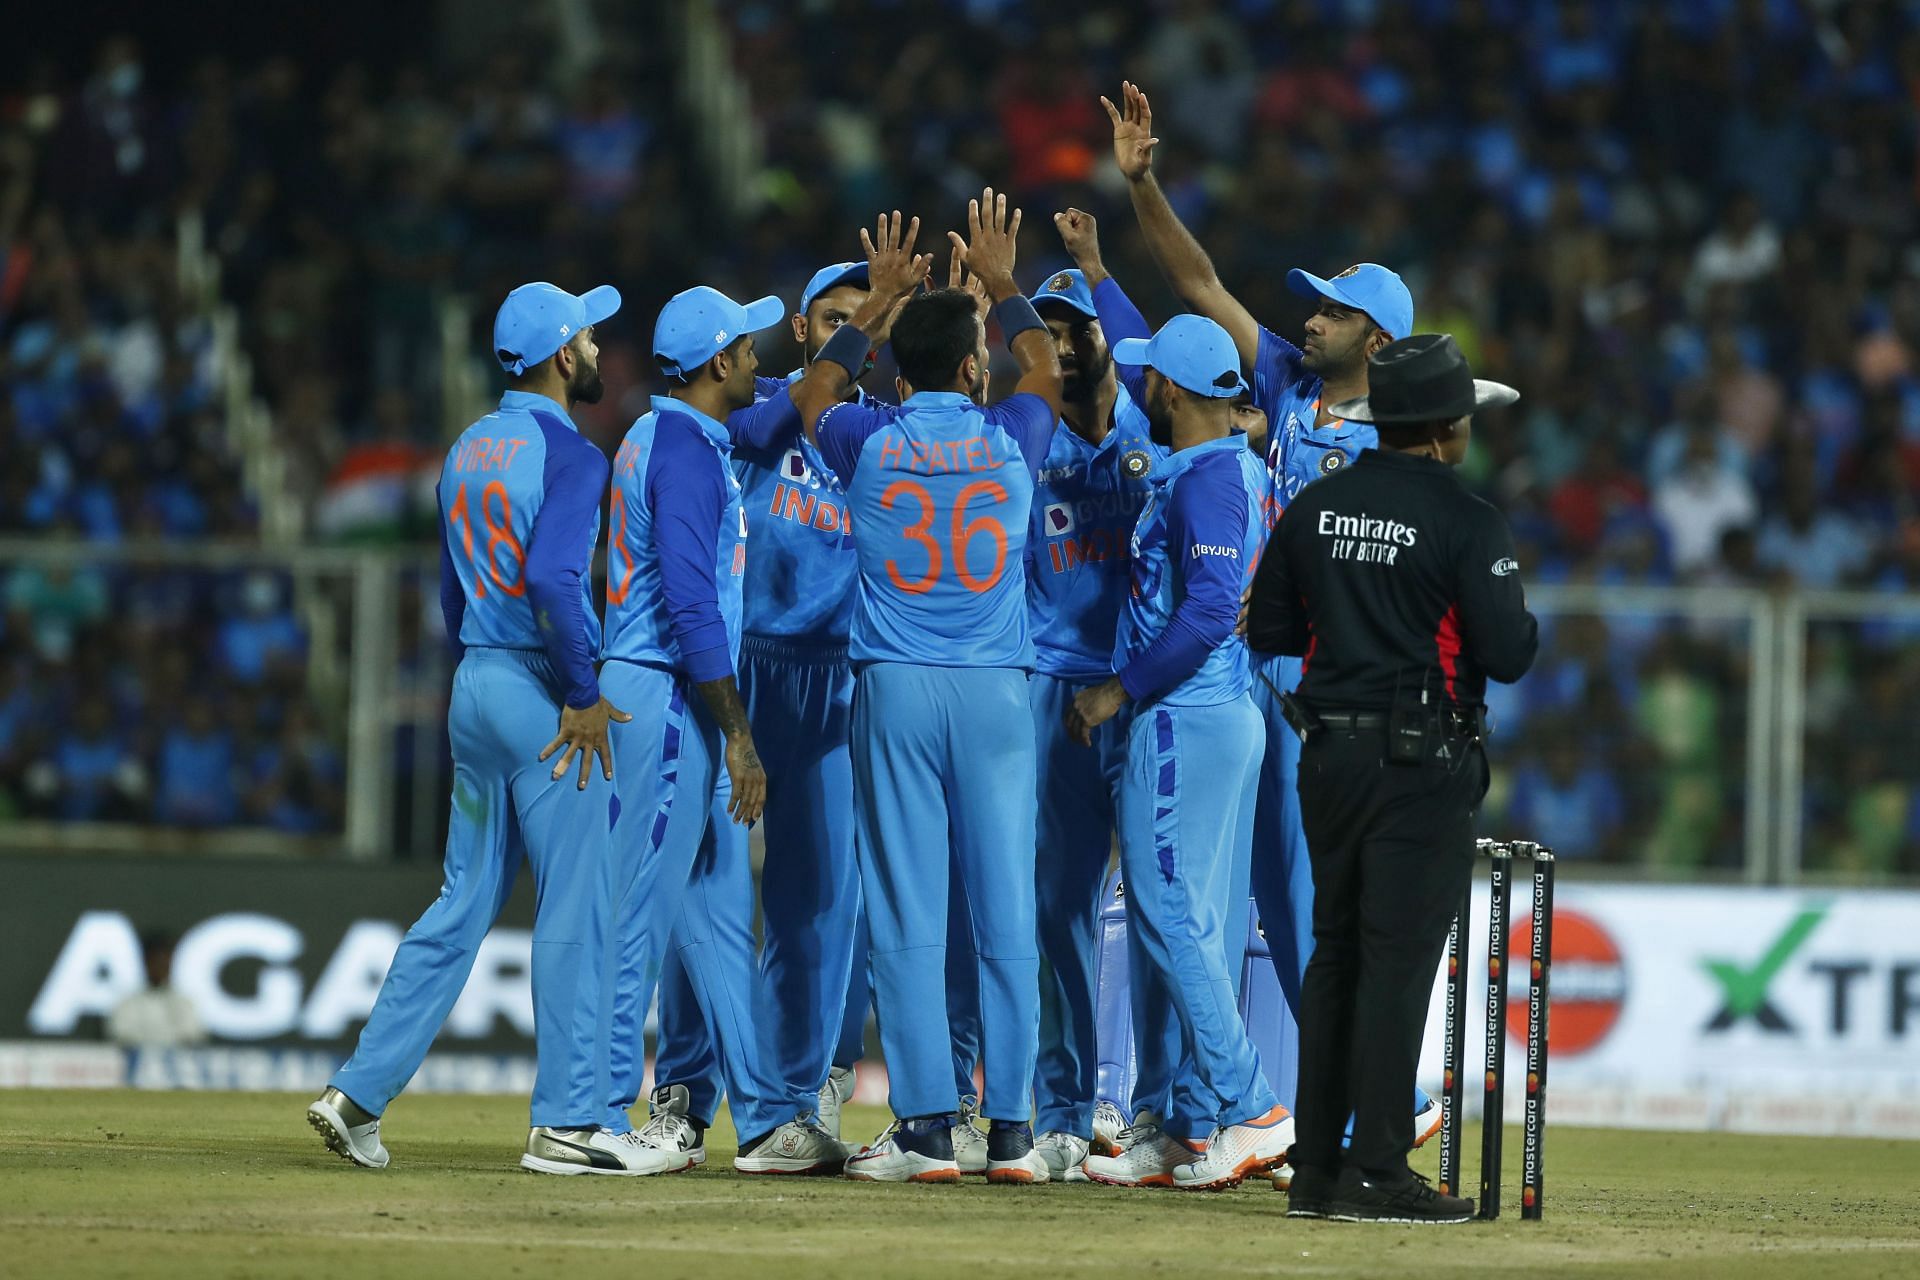 Indian cricket team. (Credits: Getty)